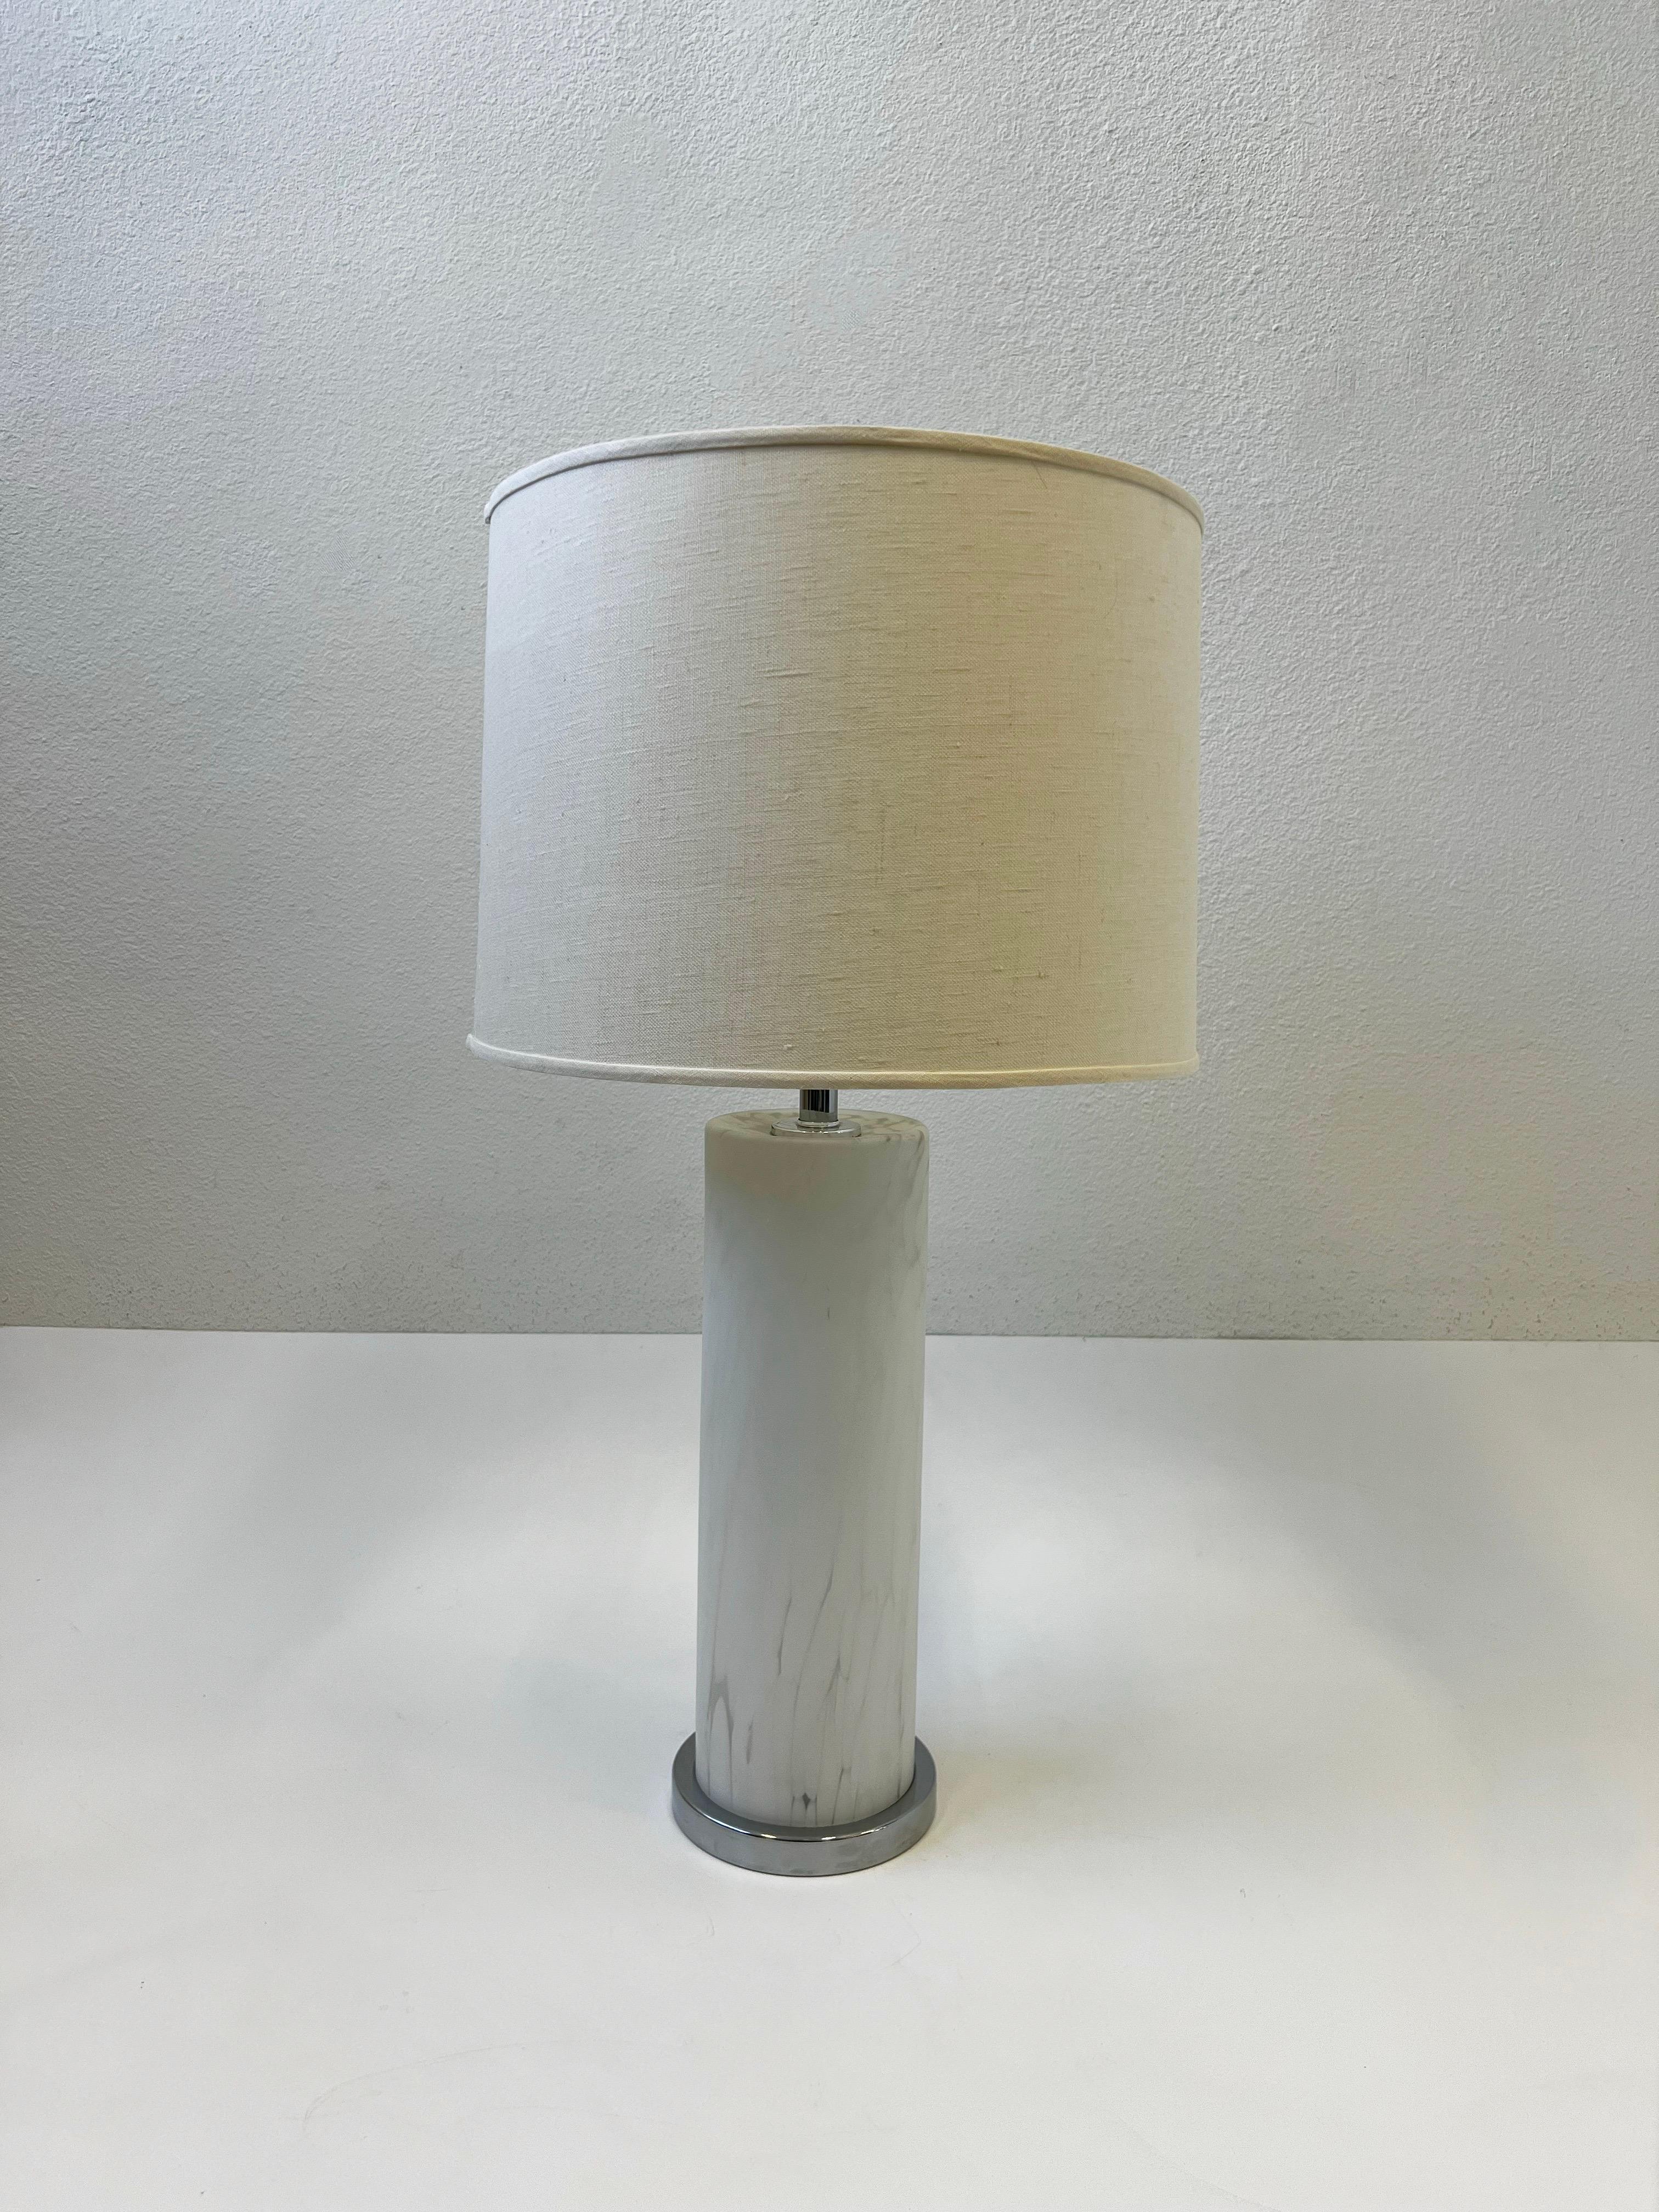 Italian white frosted Murano glass and polish chrome table lamp by Mazzega. 

New socket and new shade.
 It has a three way rotating switch, where you can have the glass light on, the top light or both. 
It takes one 75max regular Edison light bulb